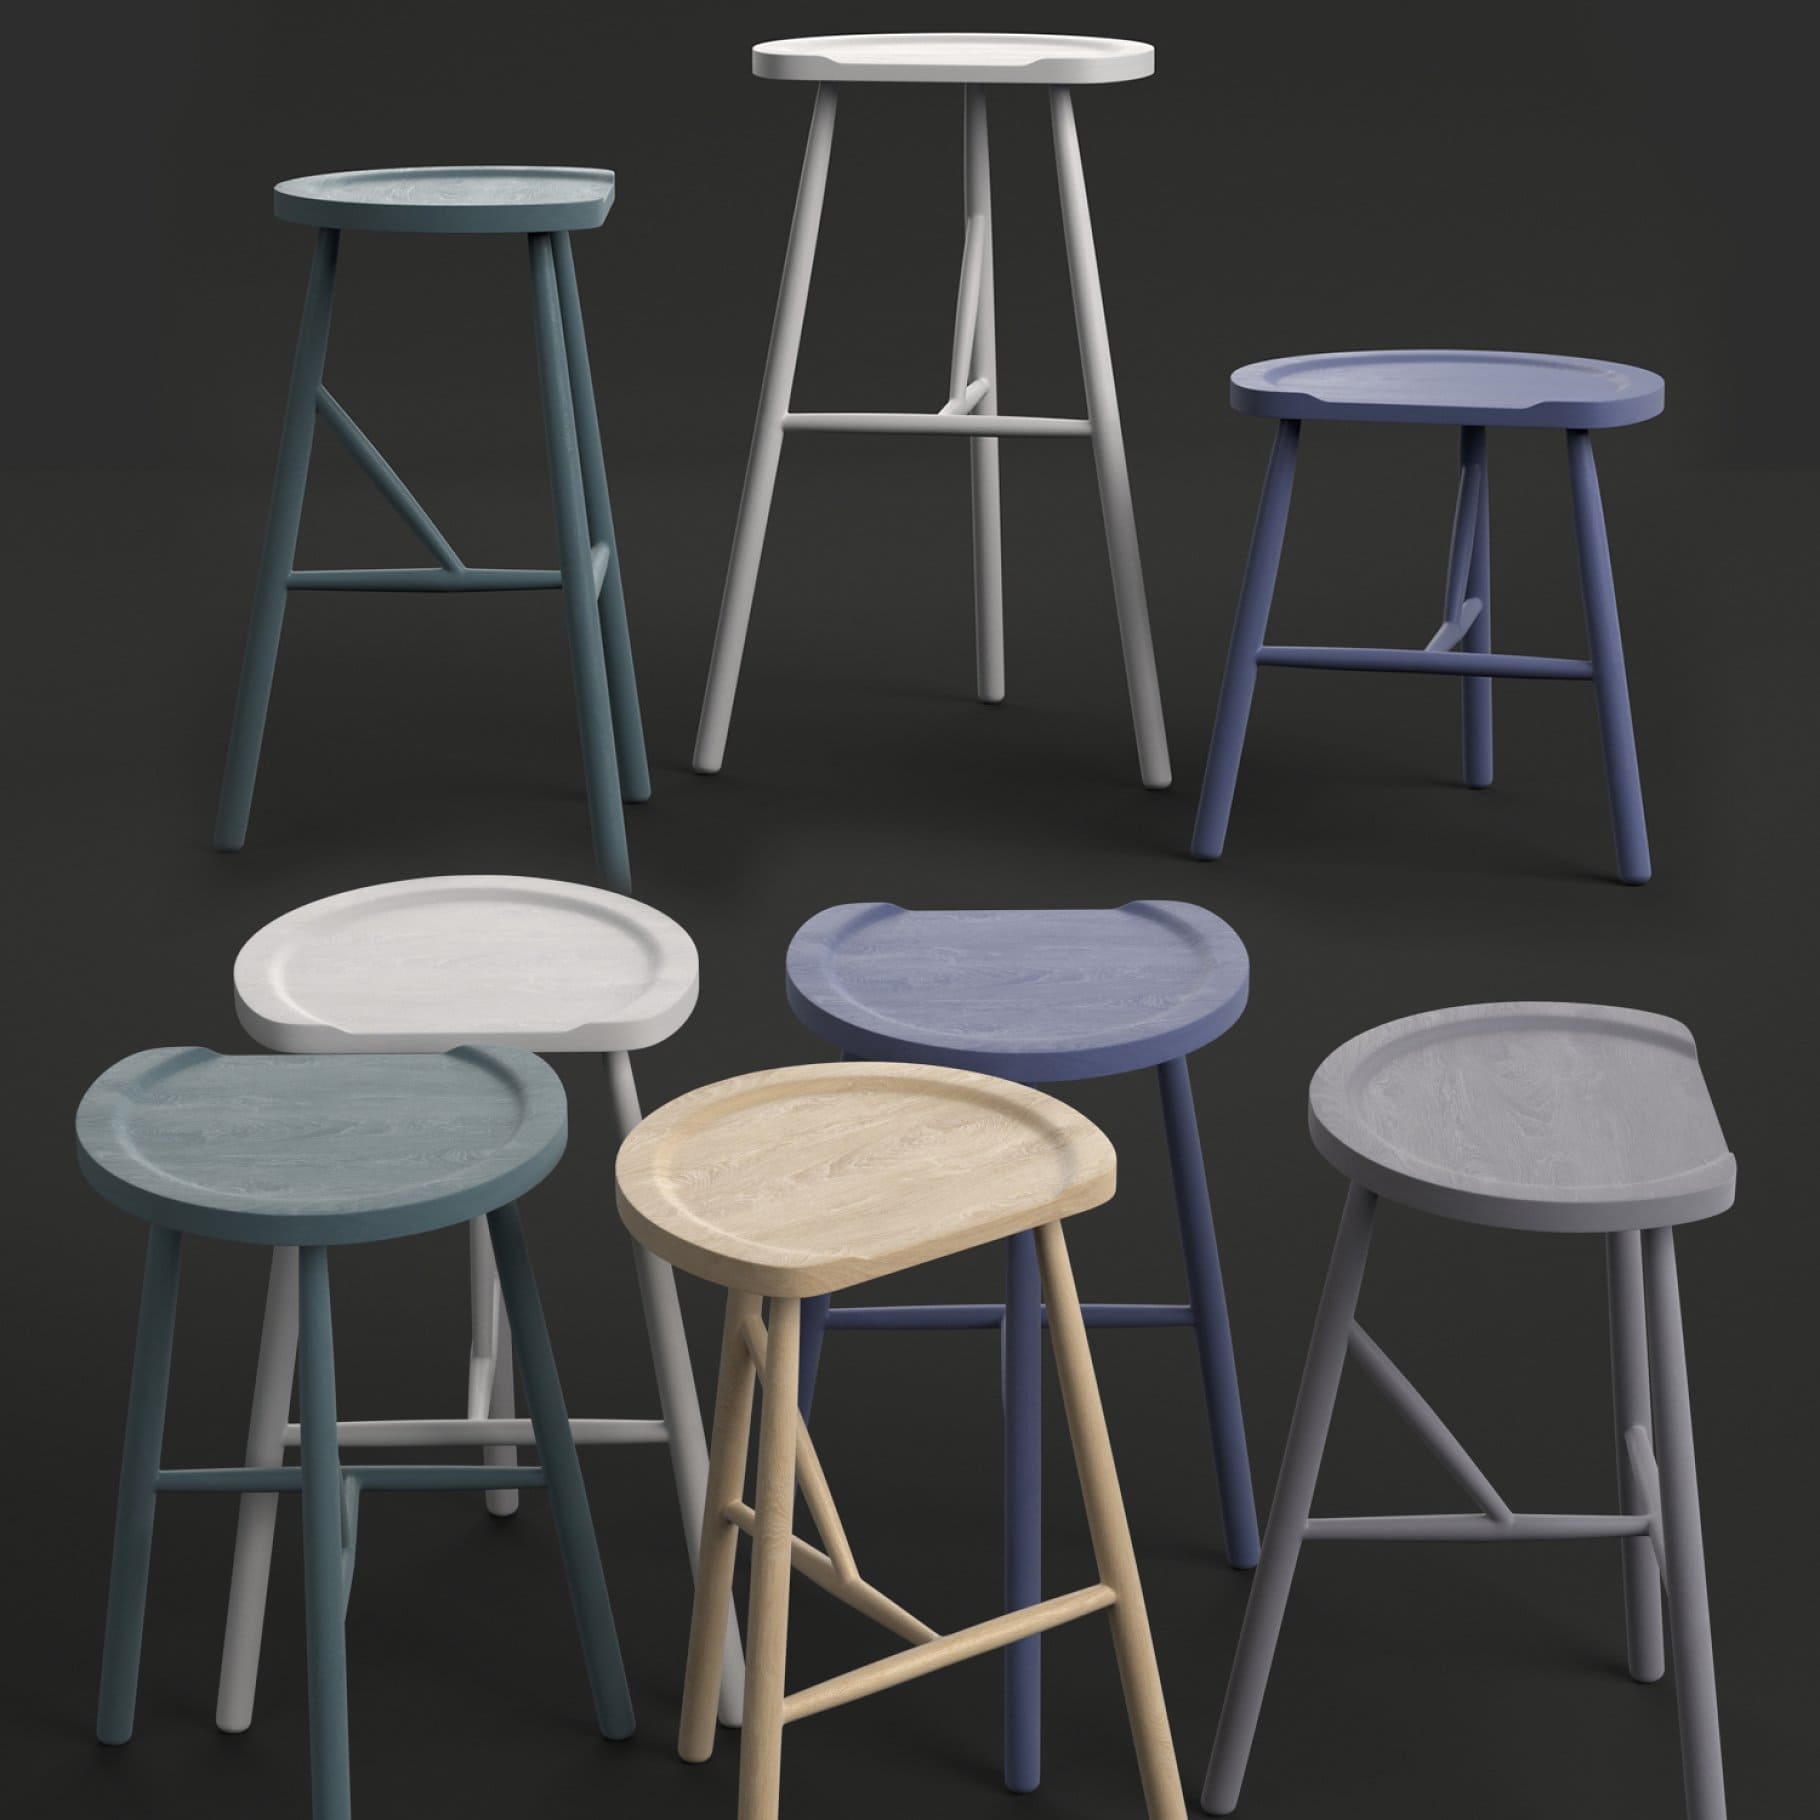 8 Puccio stools on a black background.